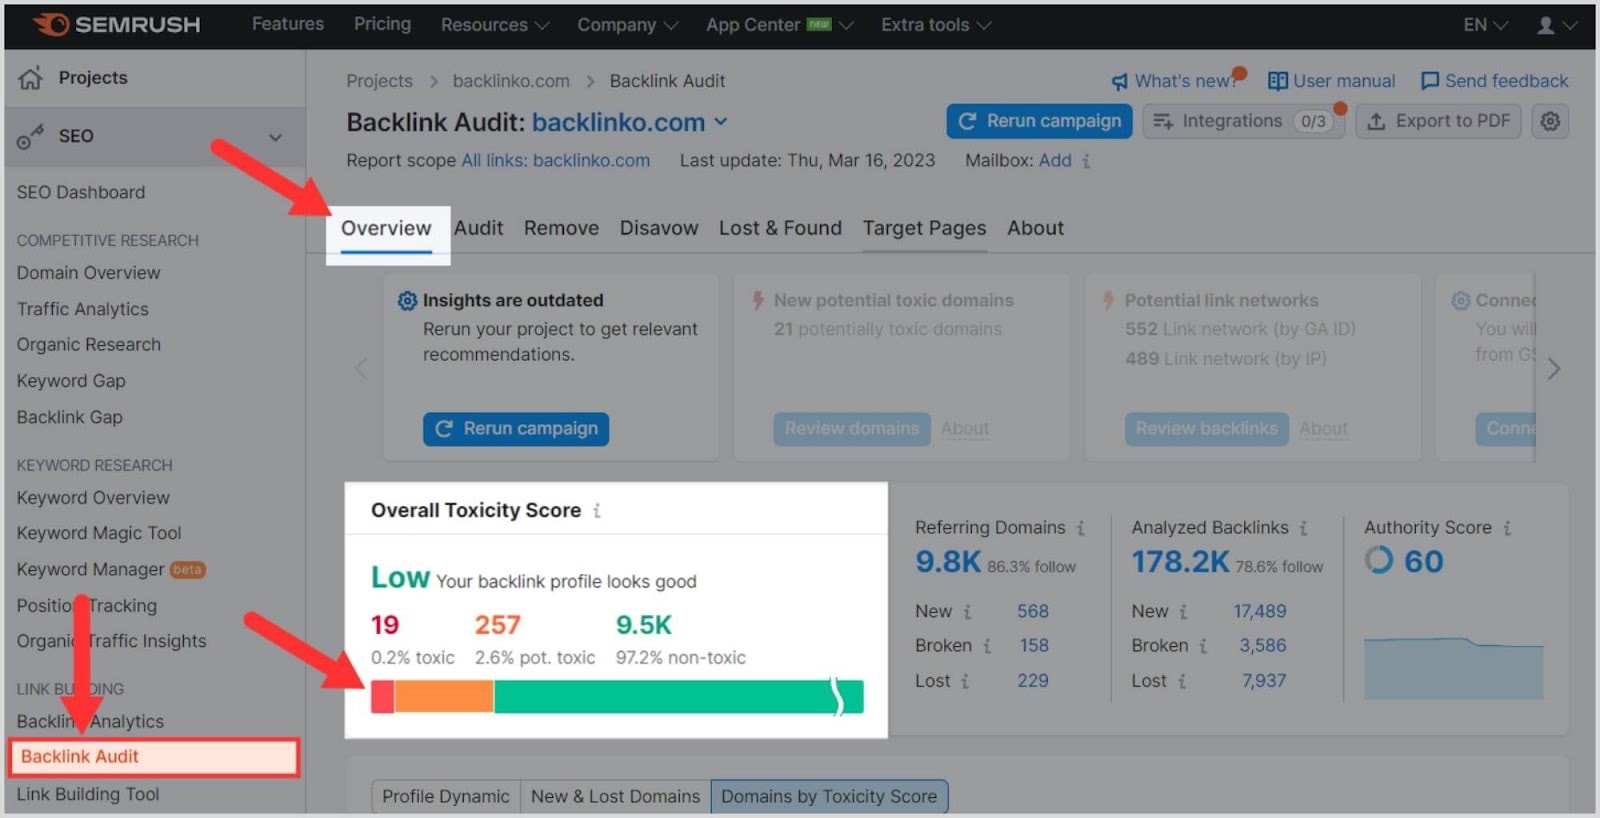 Toxicity Score shows you the bad backlinks